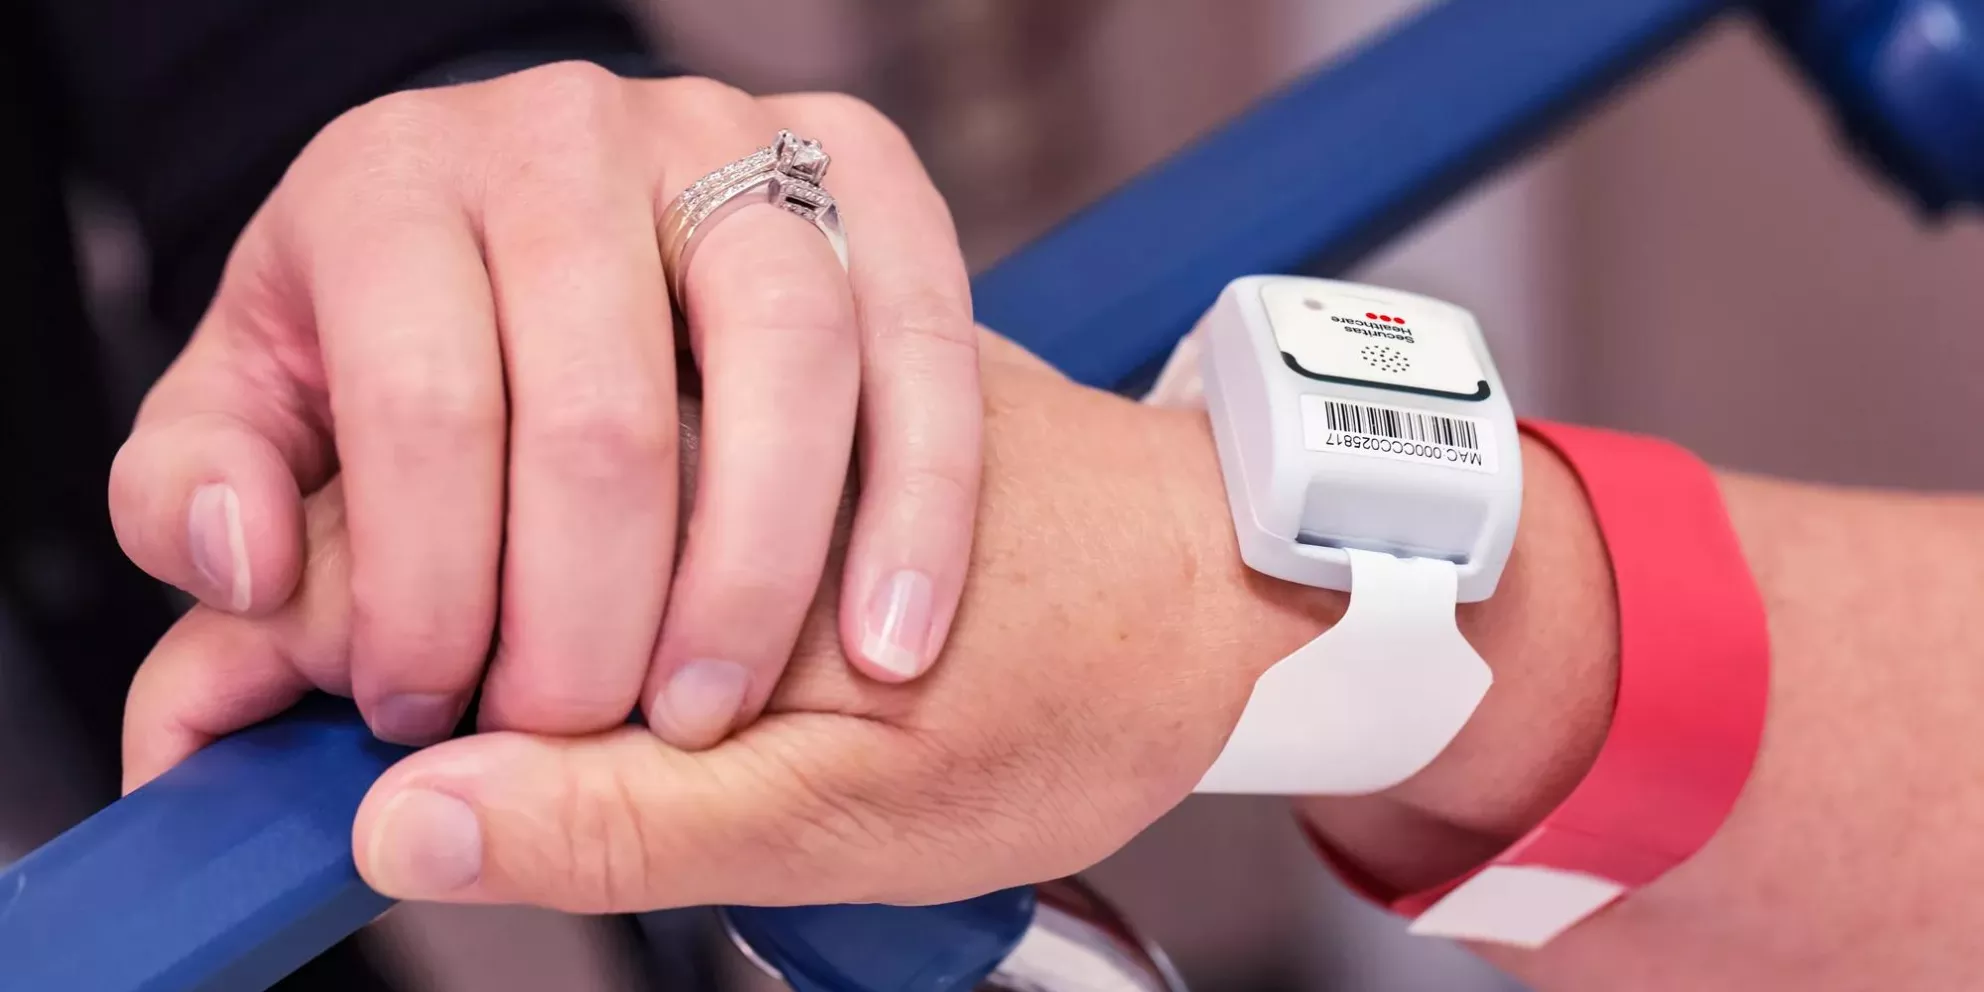 Patient protection T2 tag on a patient wrist, holding hands. Securitas Healthcare.